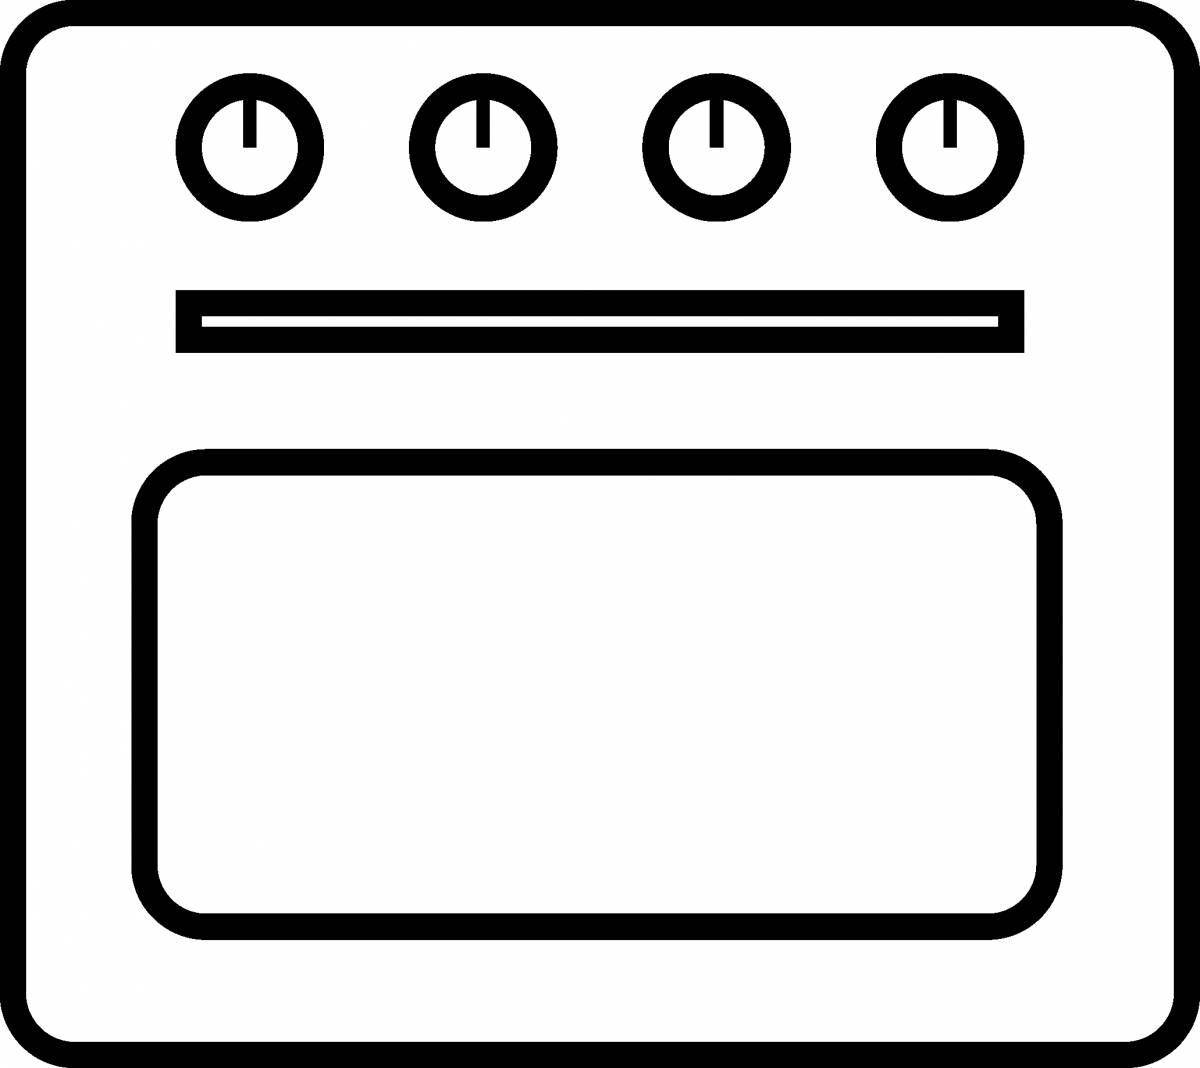 Luminous oven coloring page